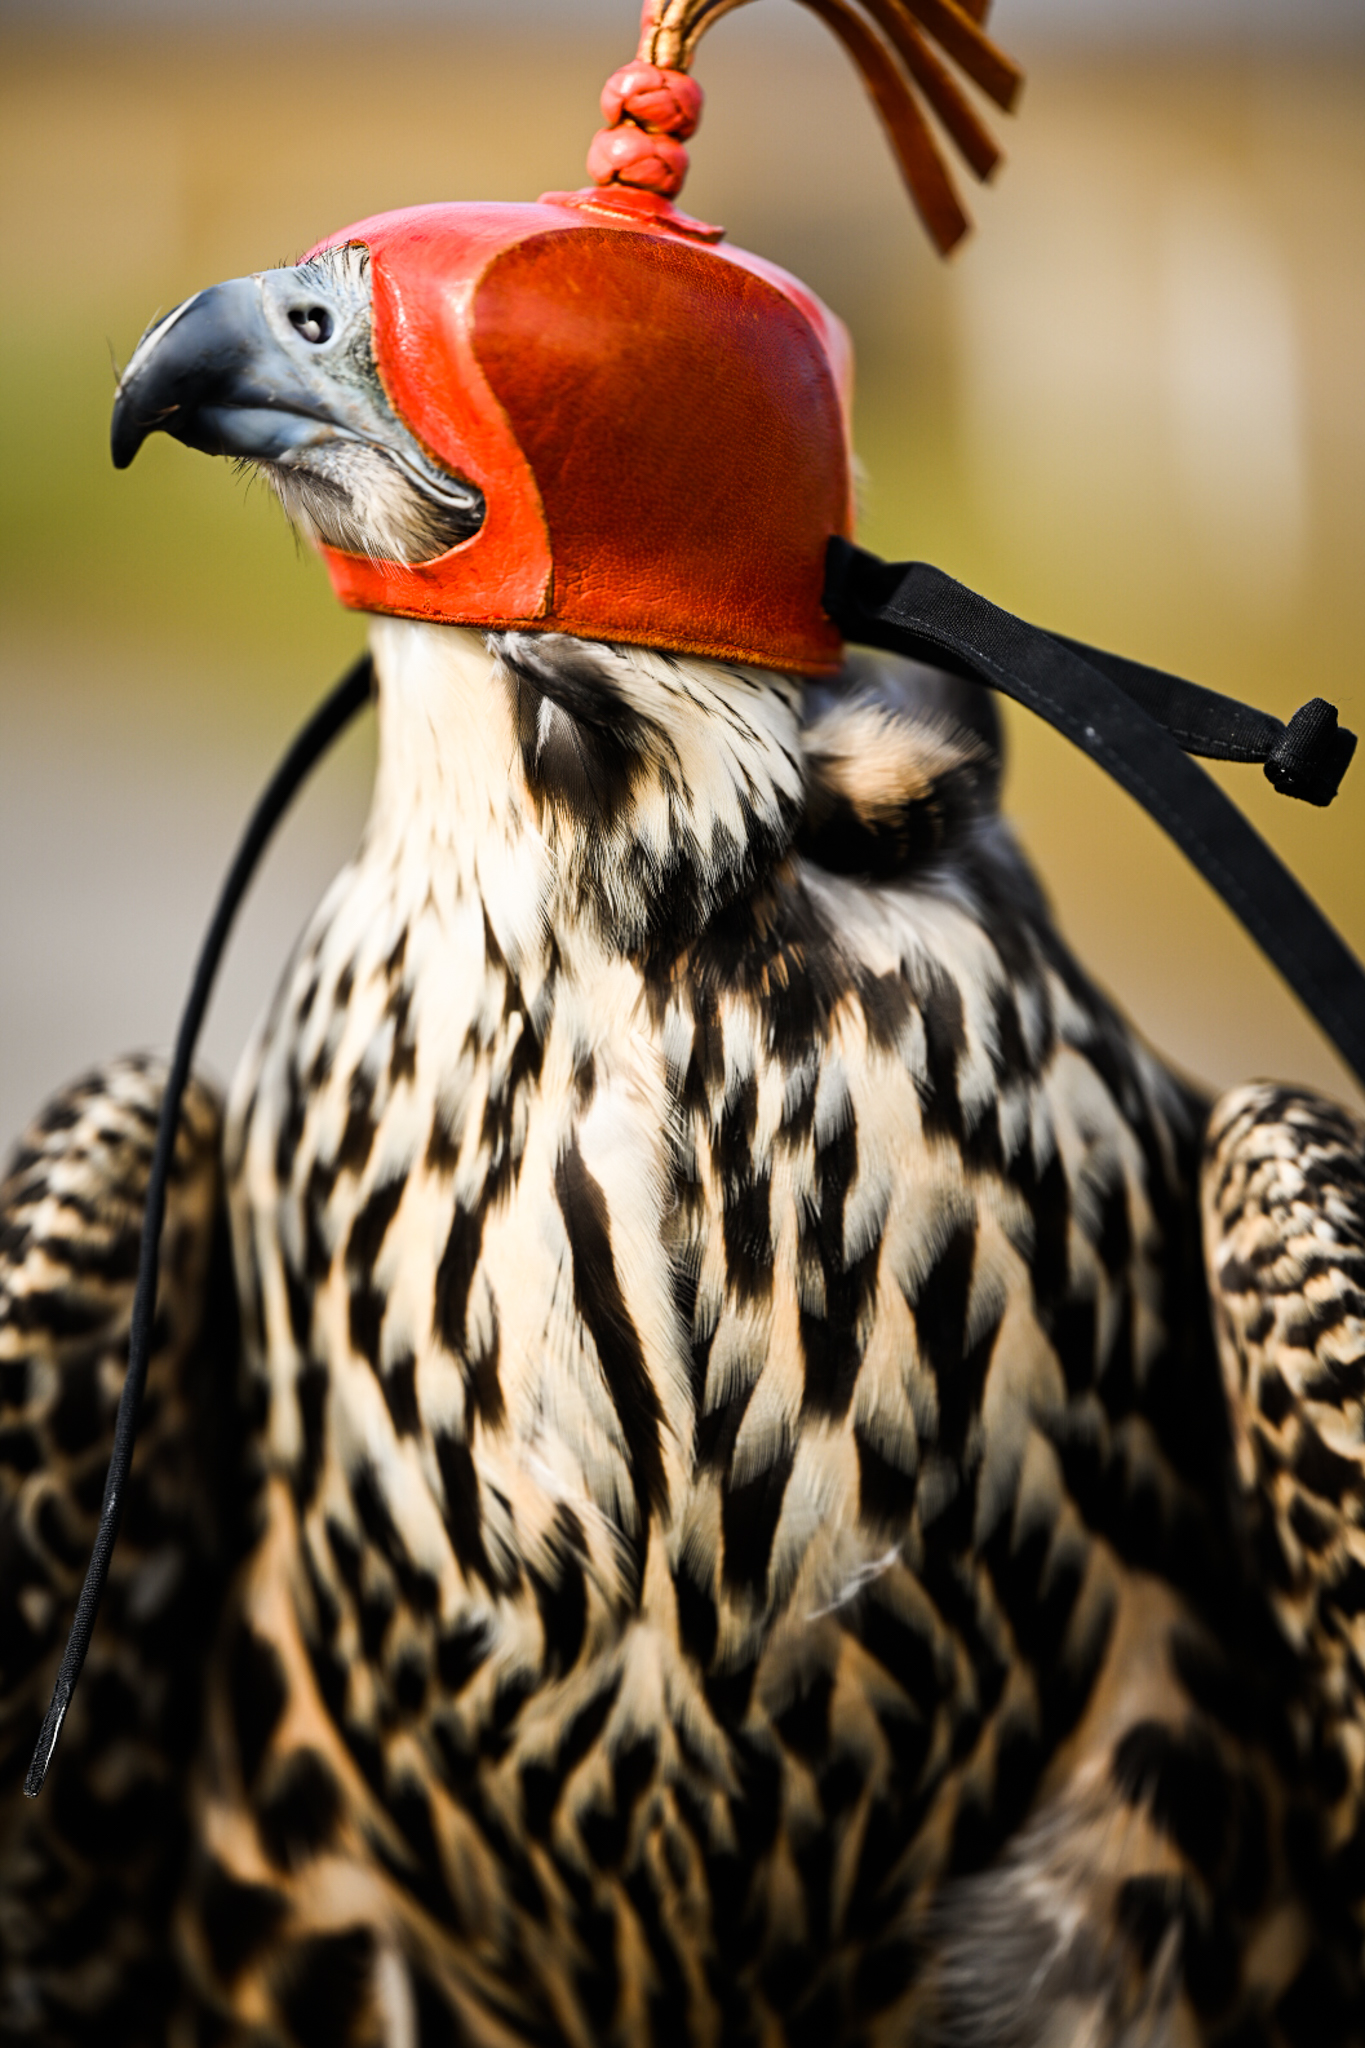 Crabcakes, the falcon, wearing a painted hood